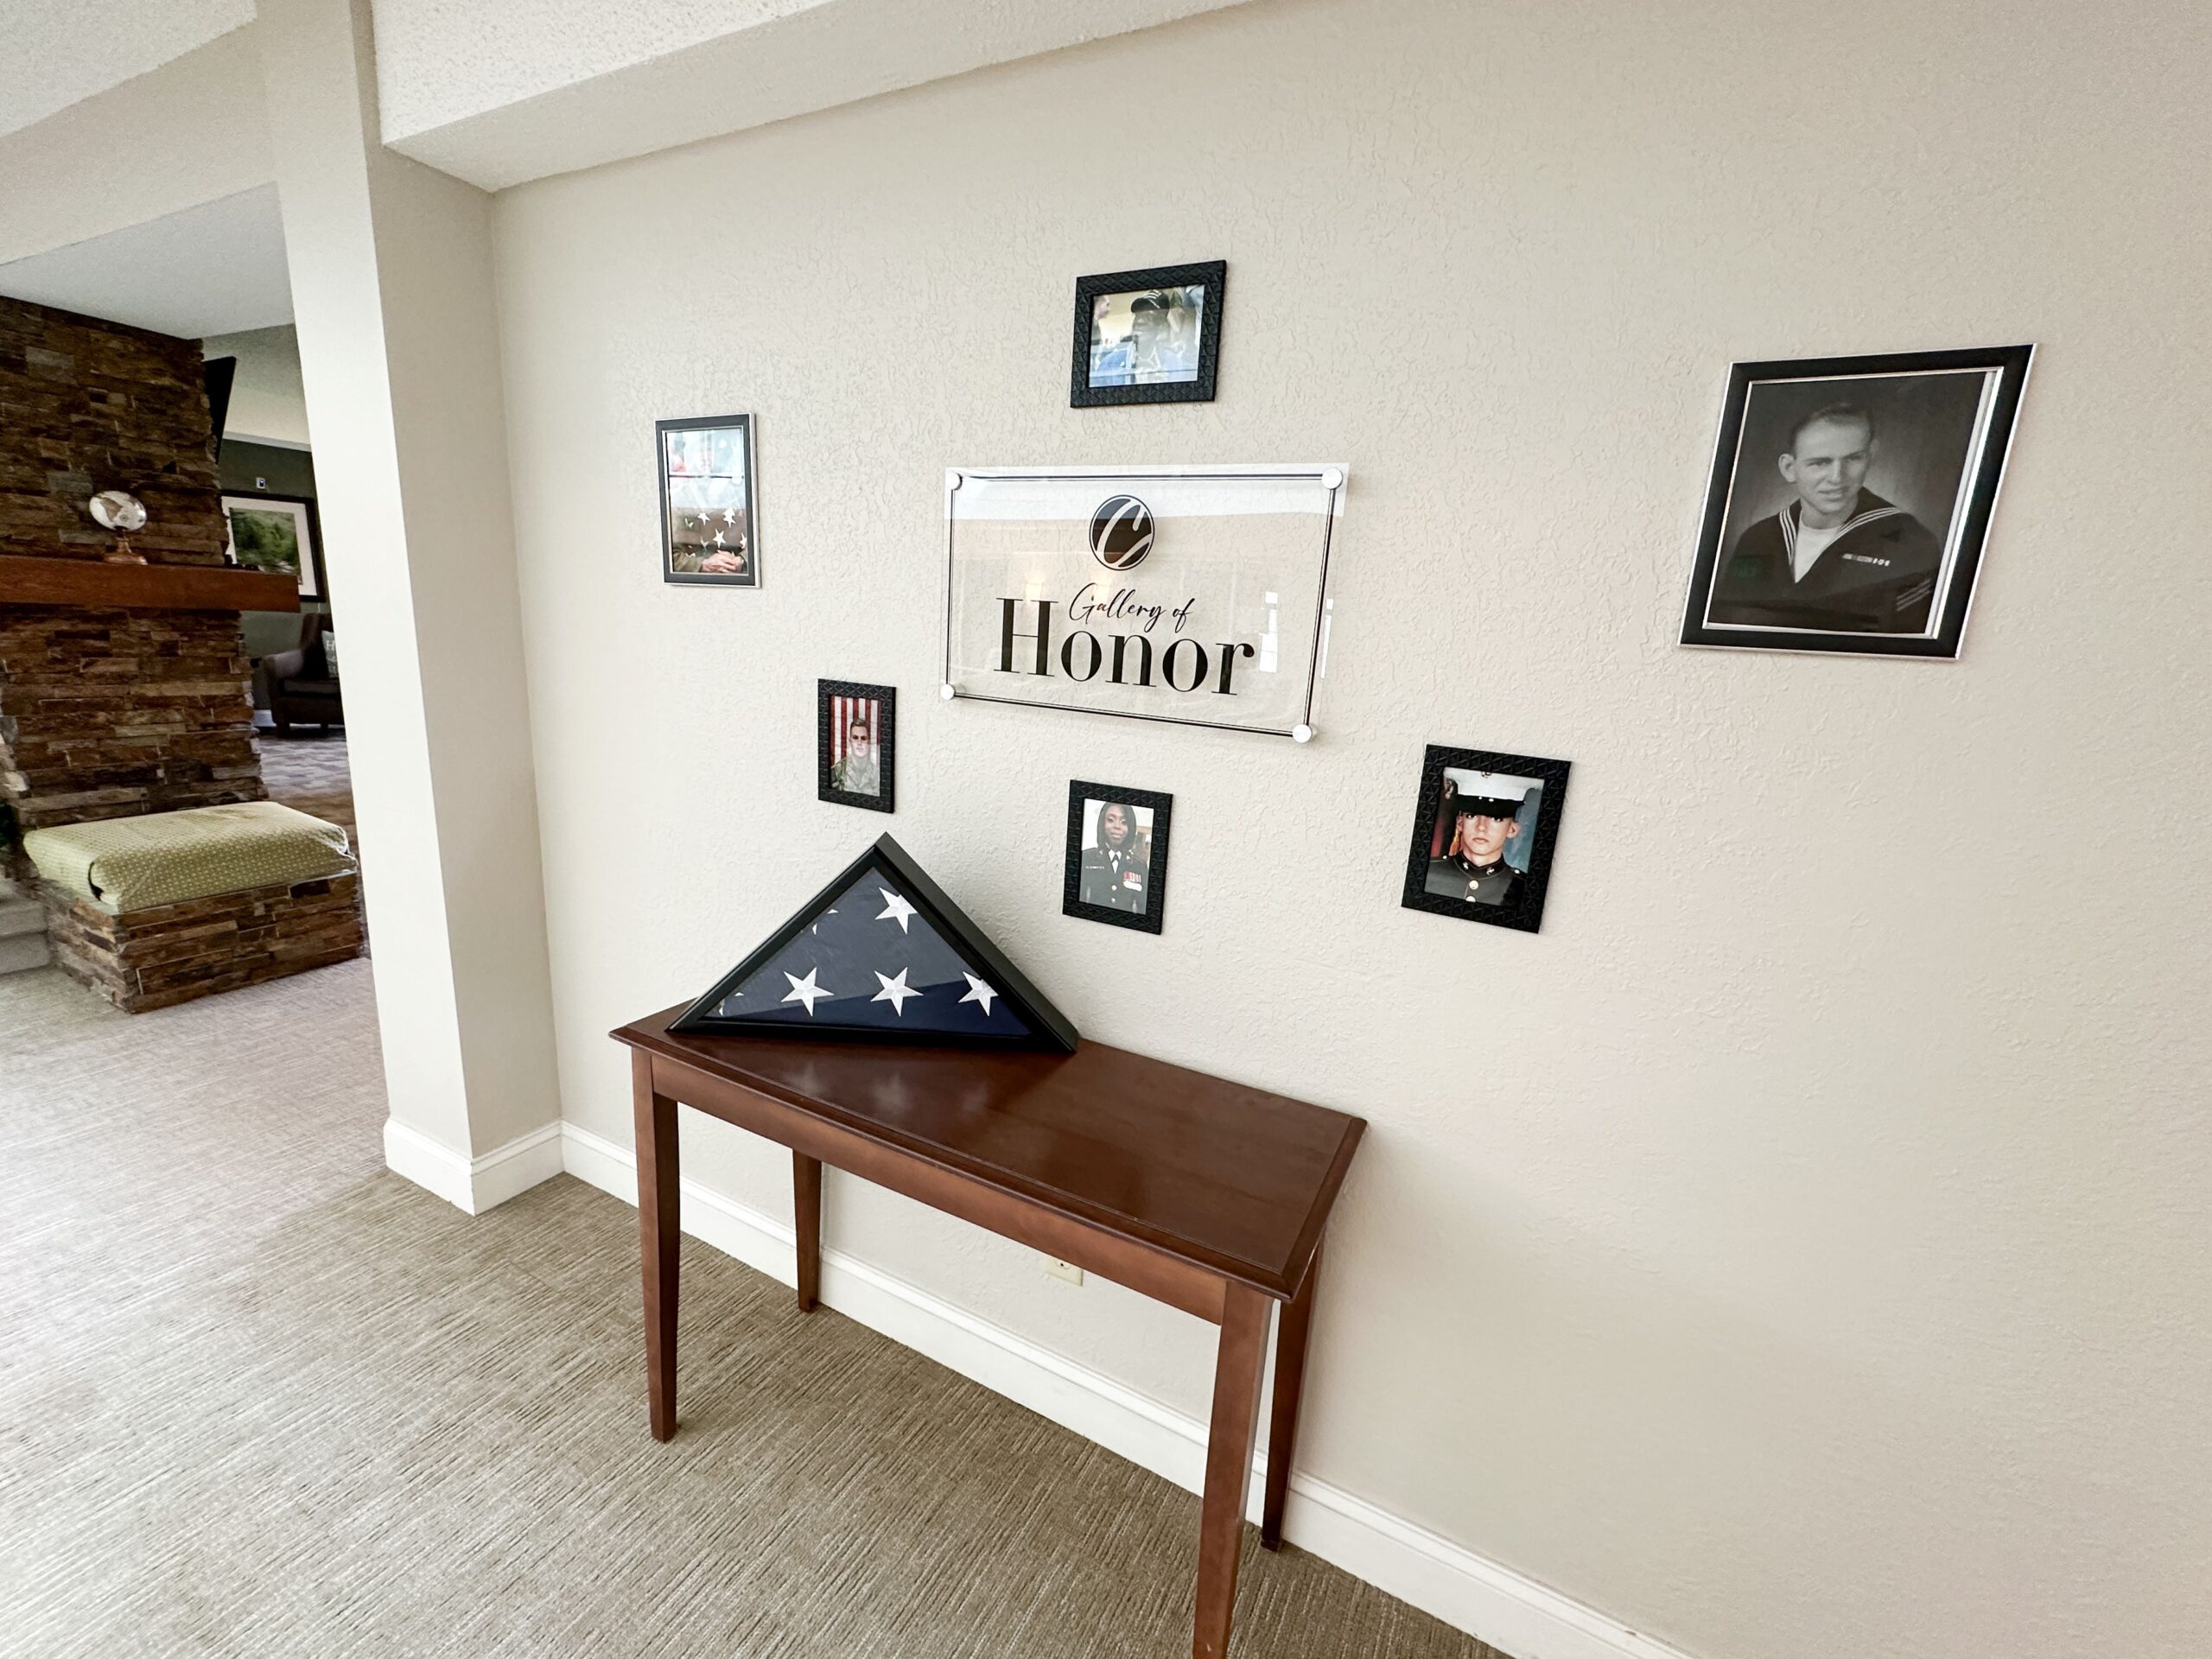 Gallery of Honor with photos of military members and folded American Flag